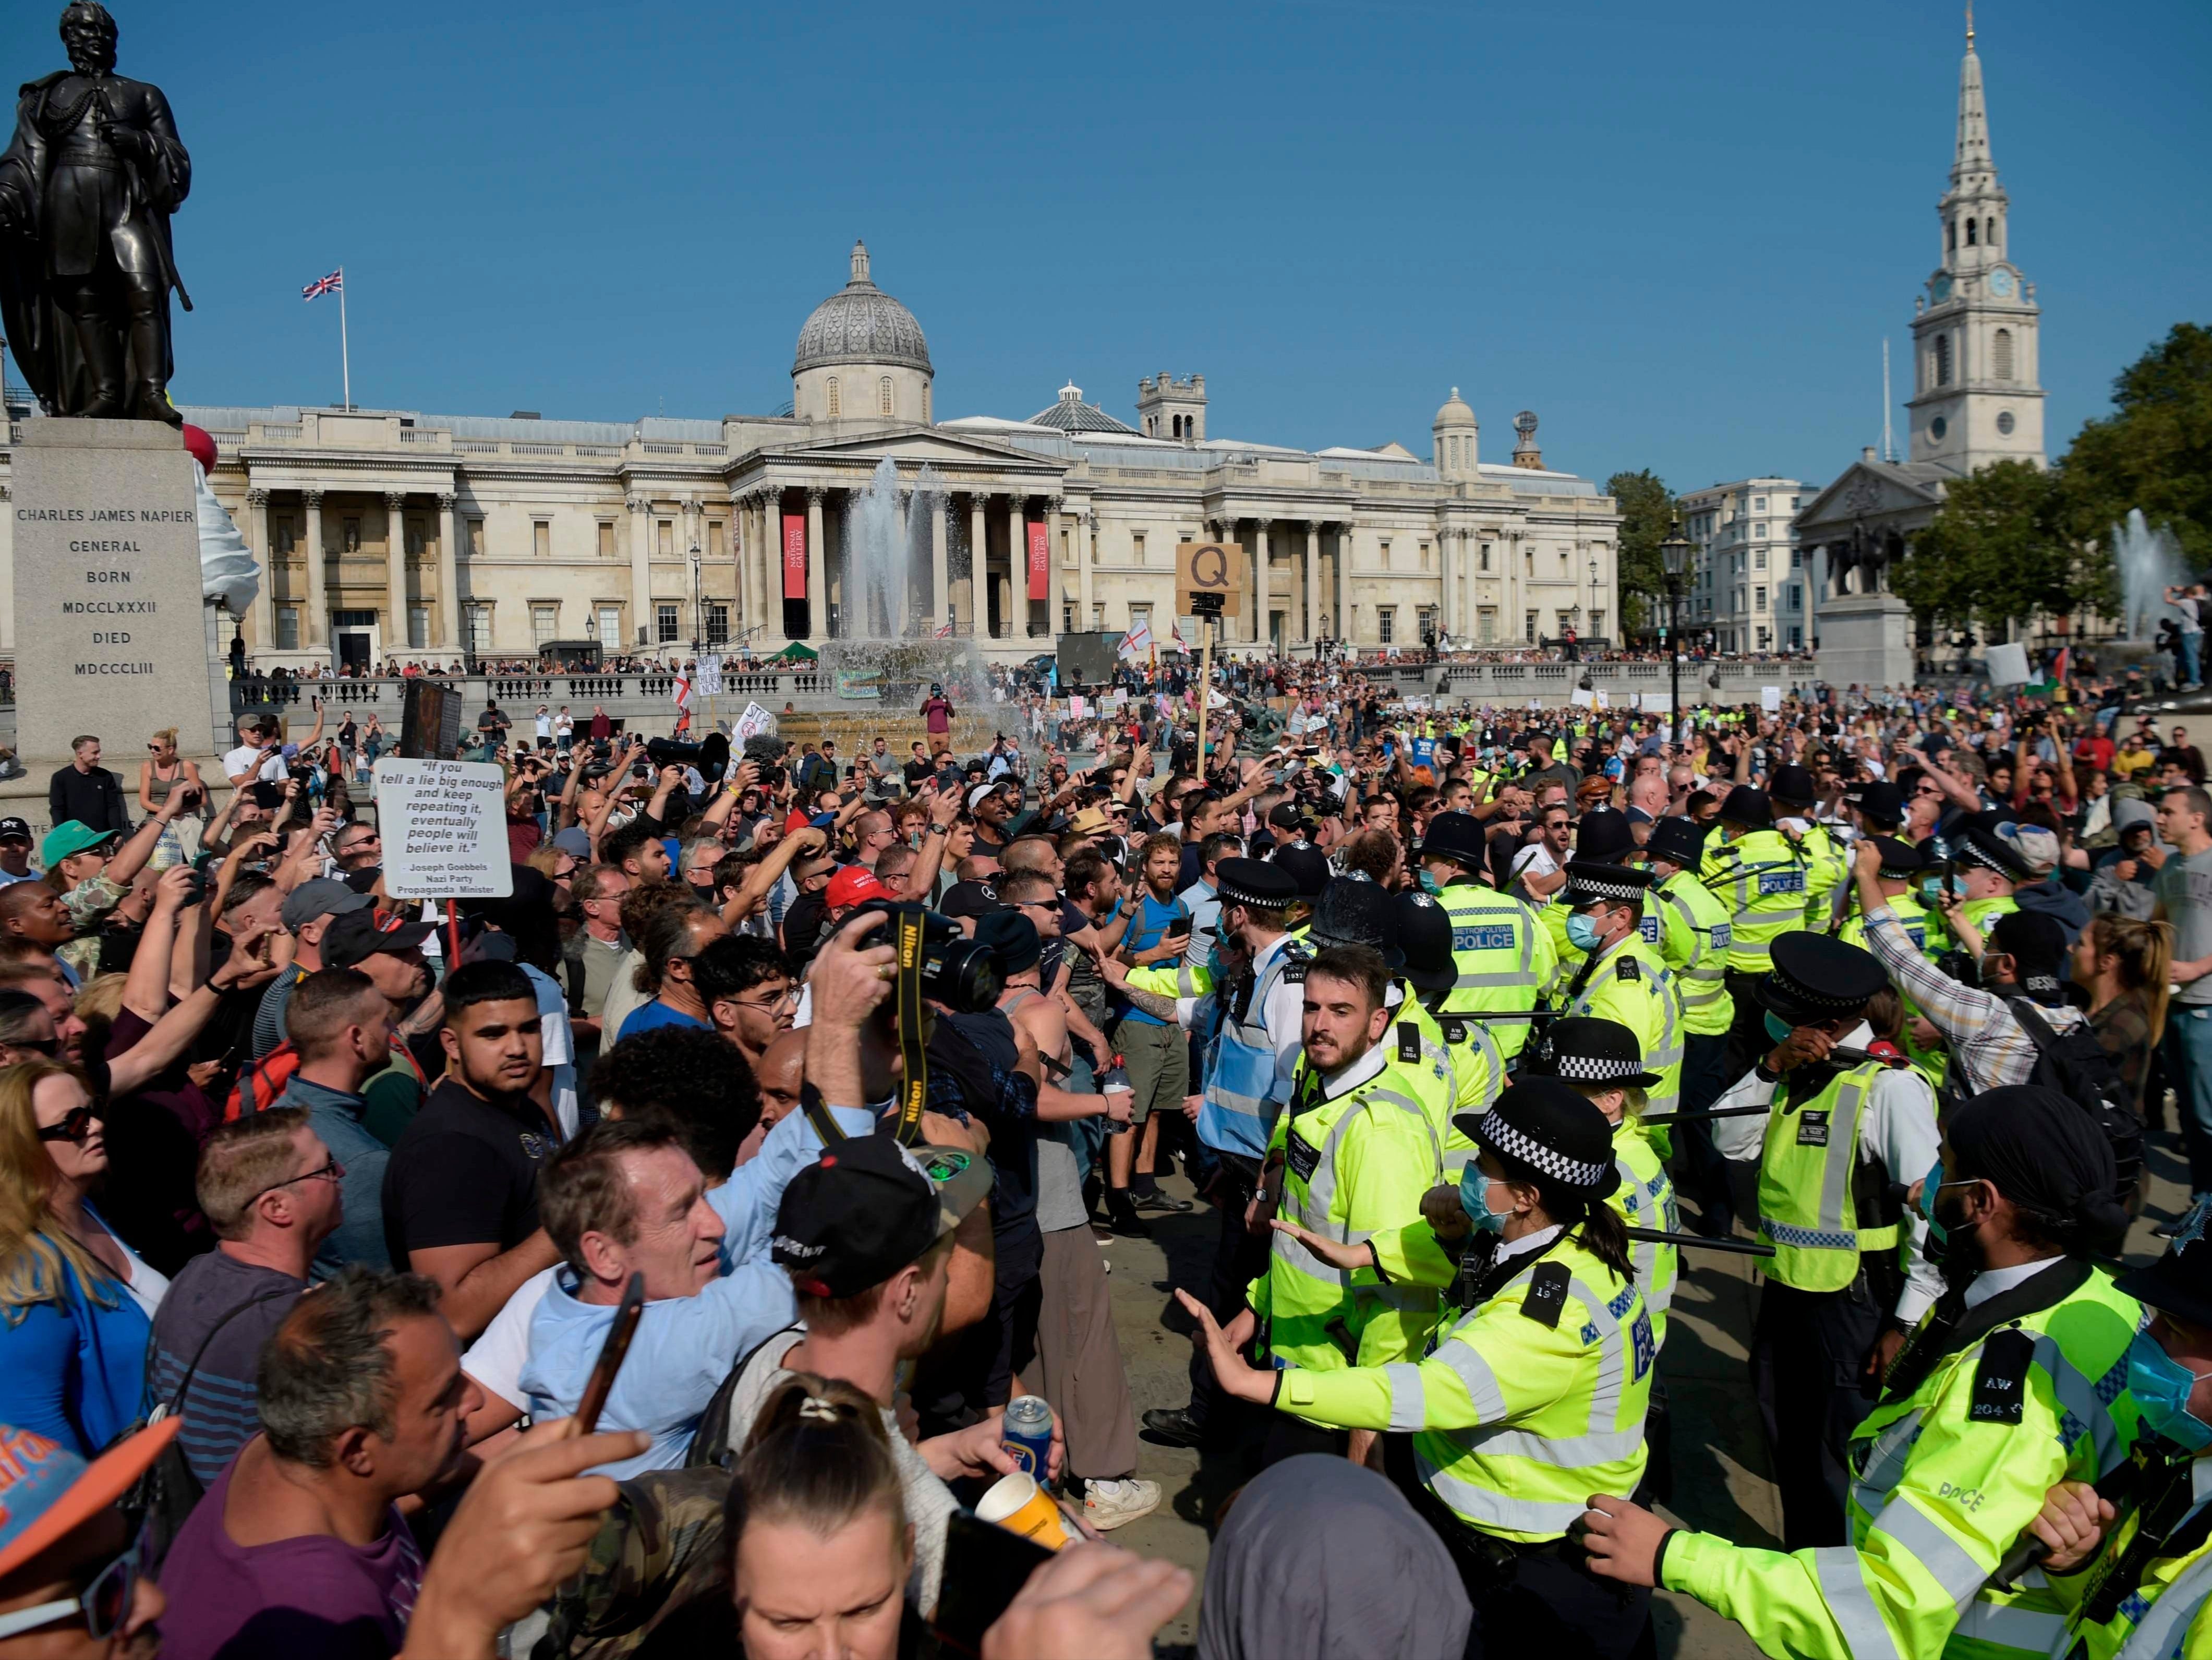 Conspiracy theorists, including Q believers, clash with police at an anti-lockdown protest in Trafalgar Square, London, on Saturday 19 September 2020